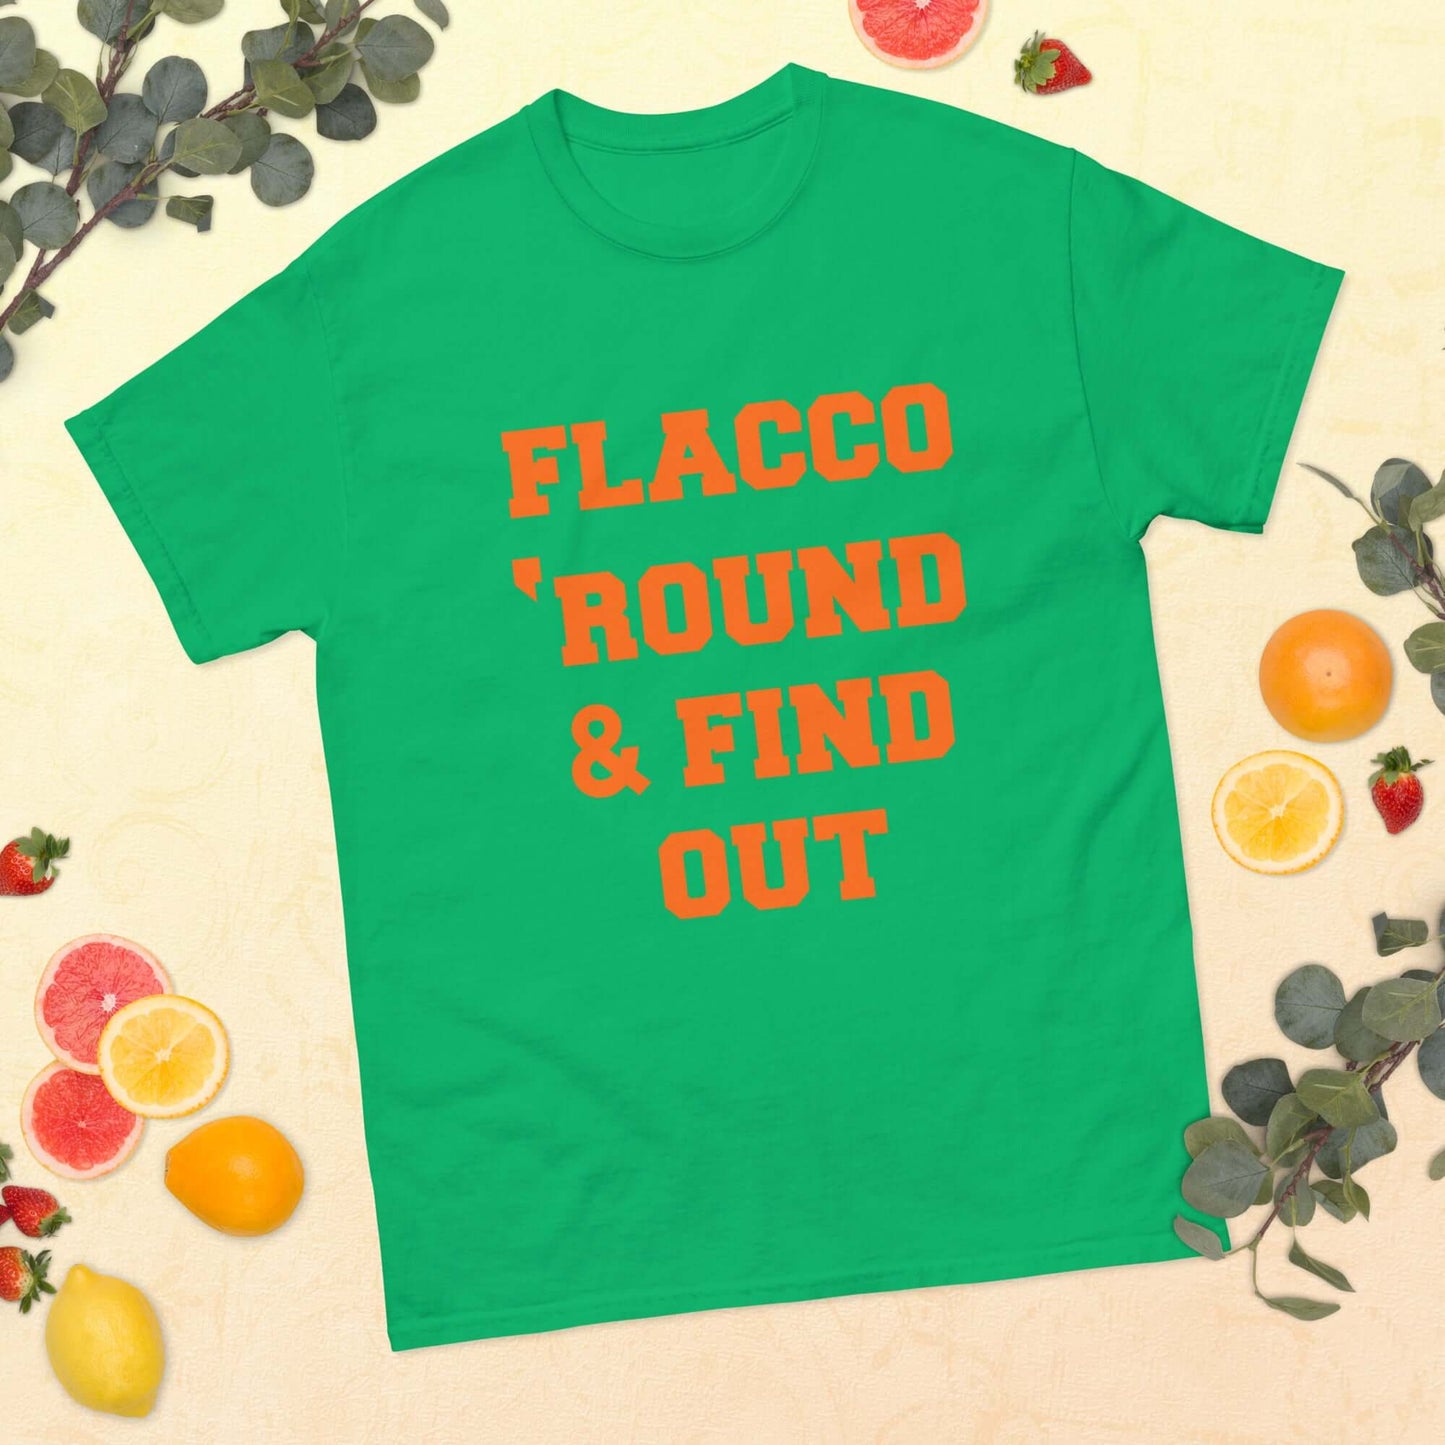 Cleveland Browns Flacco 'round and find out Classic tee